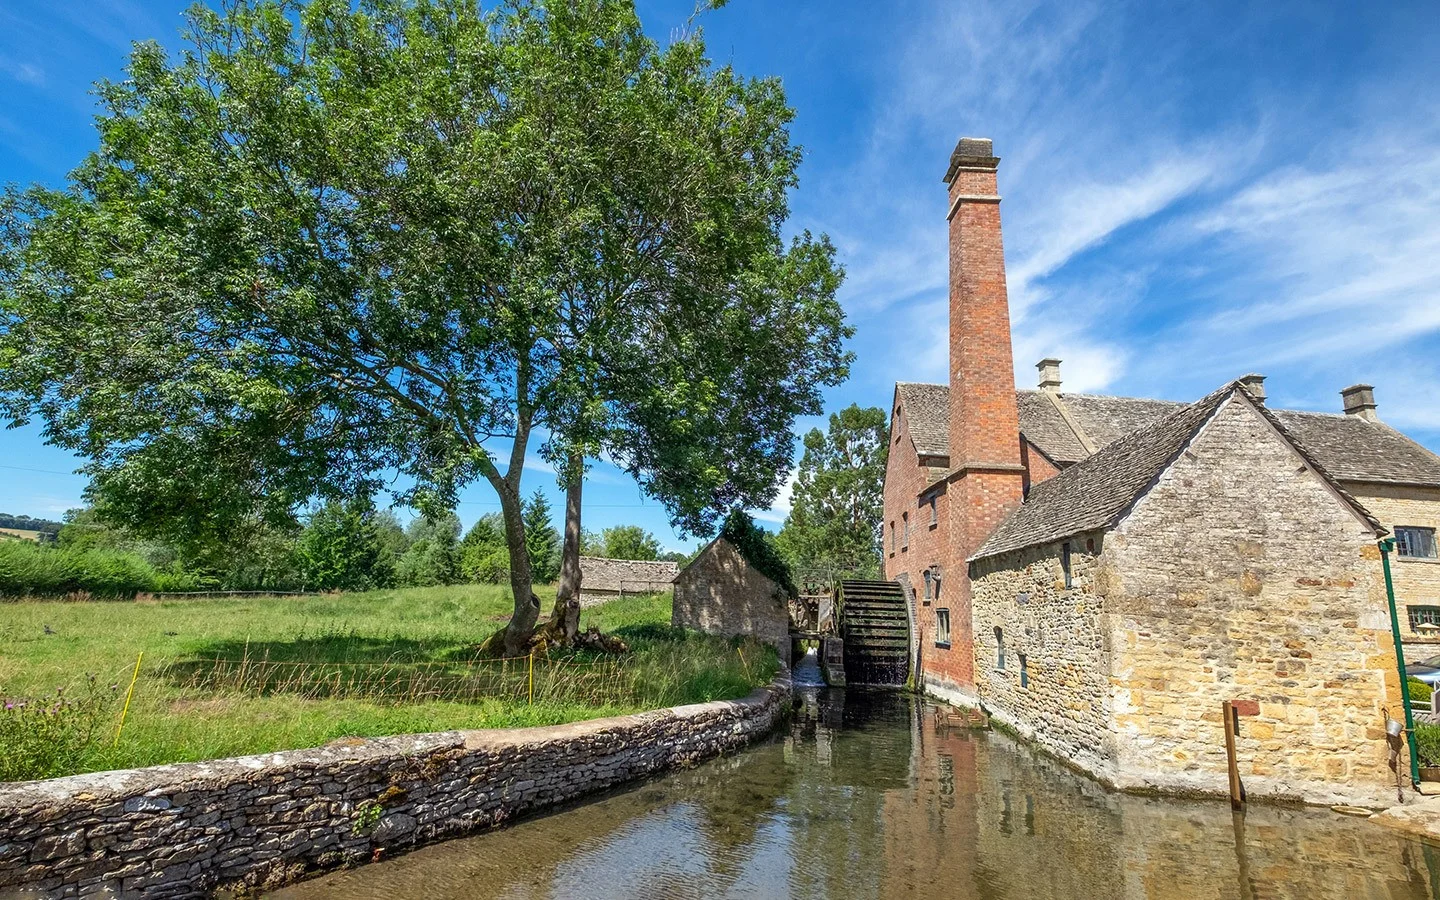 The Old Mill in Lower Slaughter in the Cotswolds